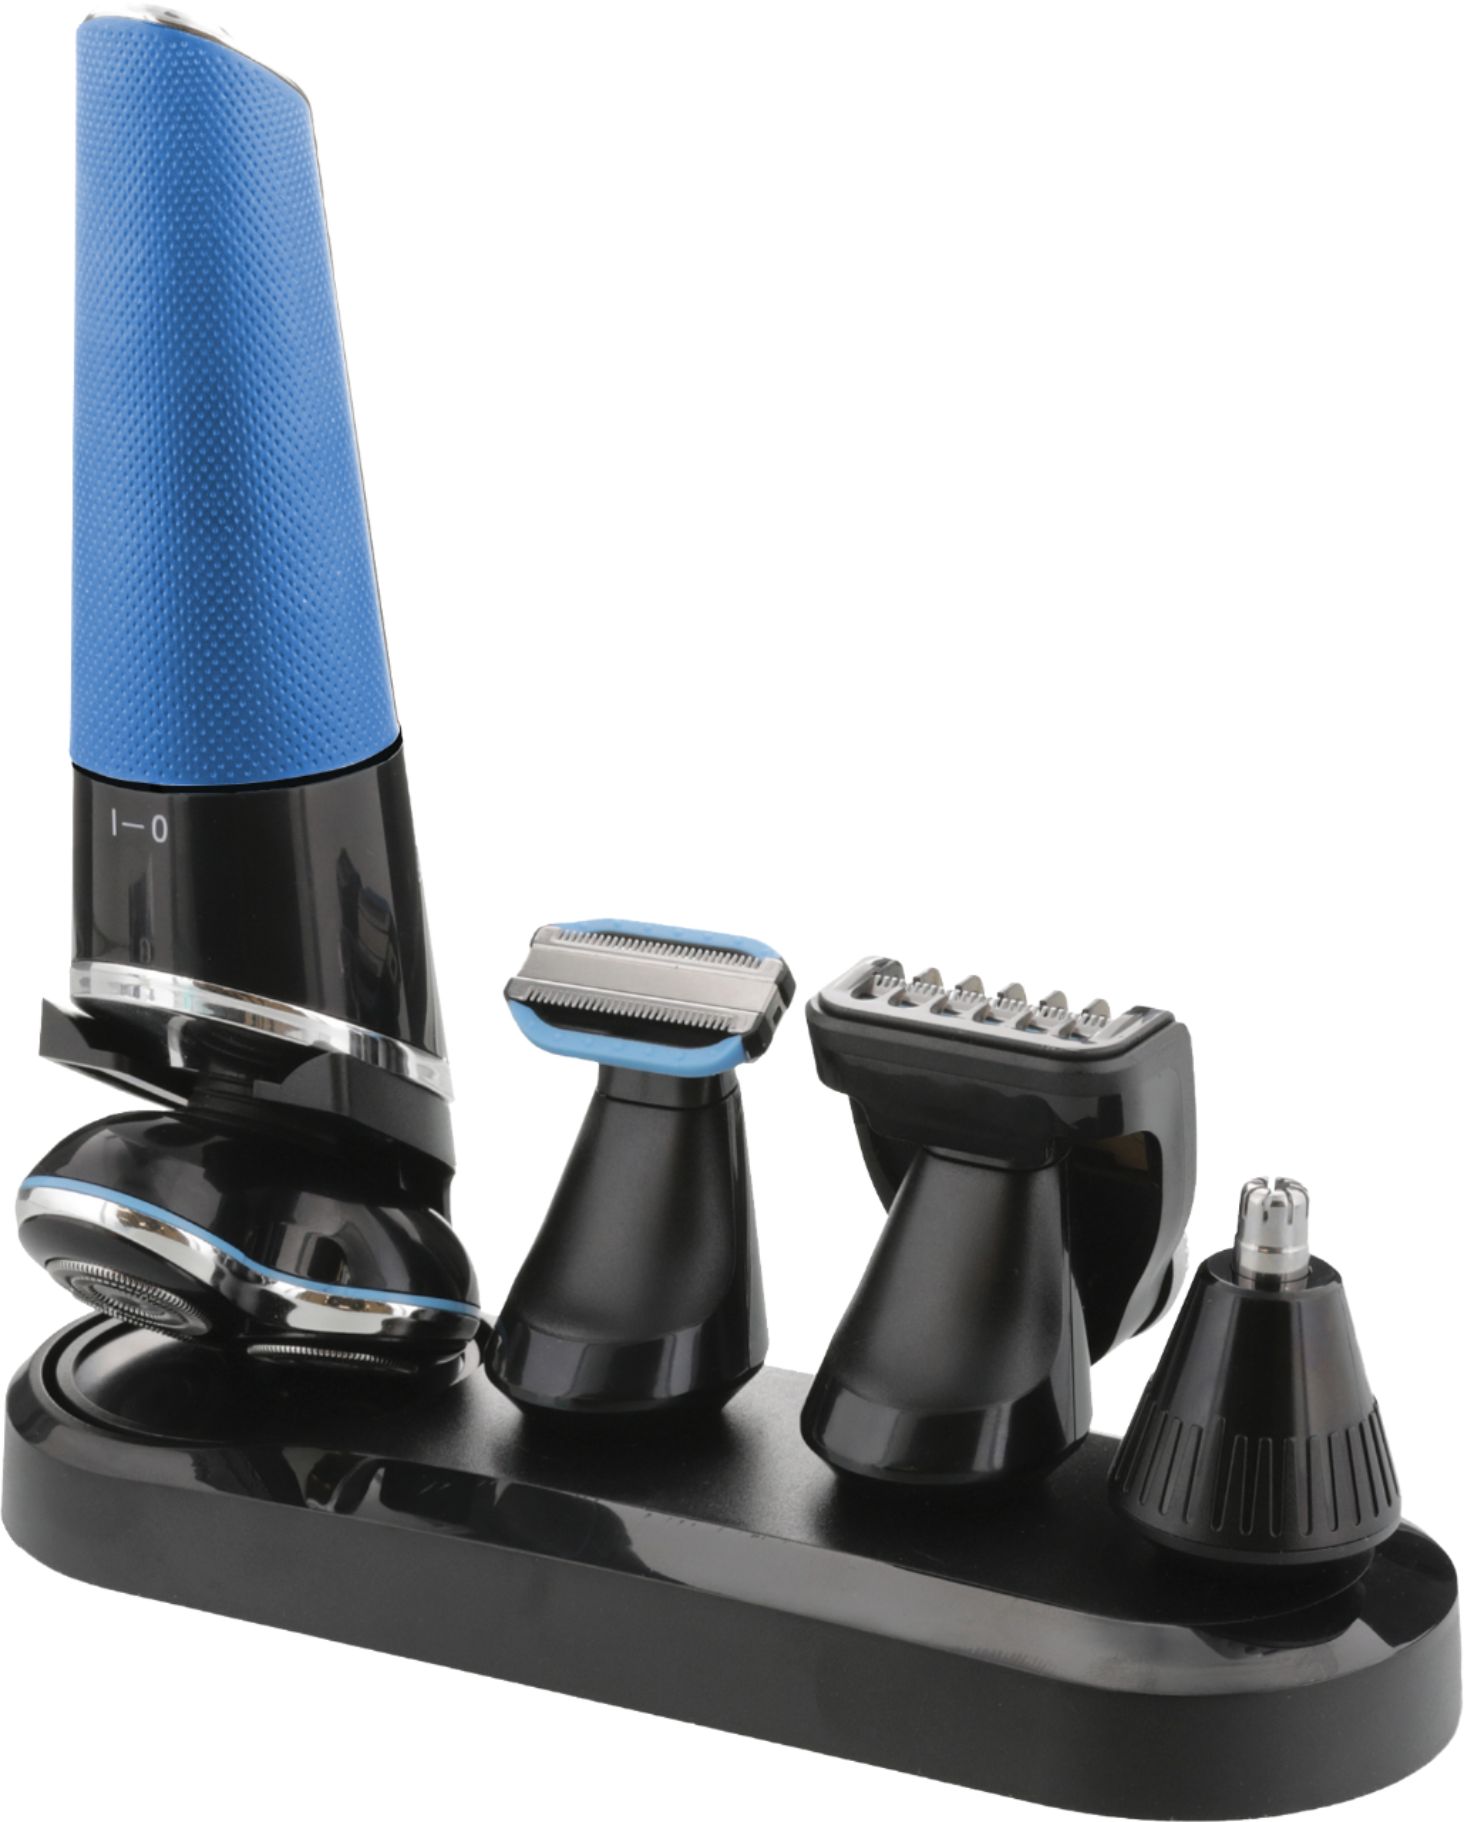 Barbasol - 5 in 1 Rechargeable Wet/Dry Rotary Electric Shaver Kit - Blue